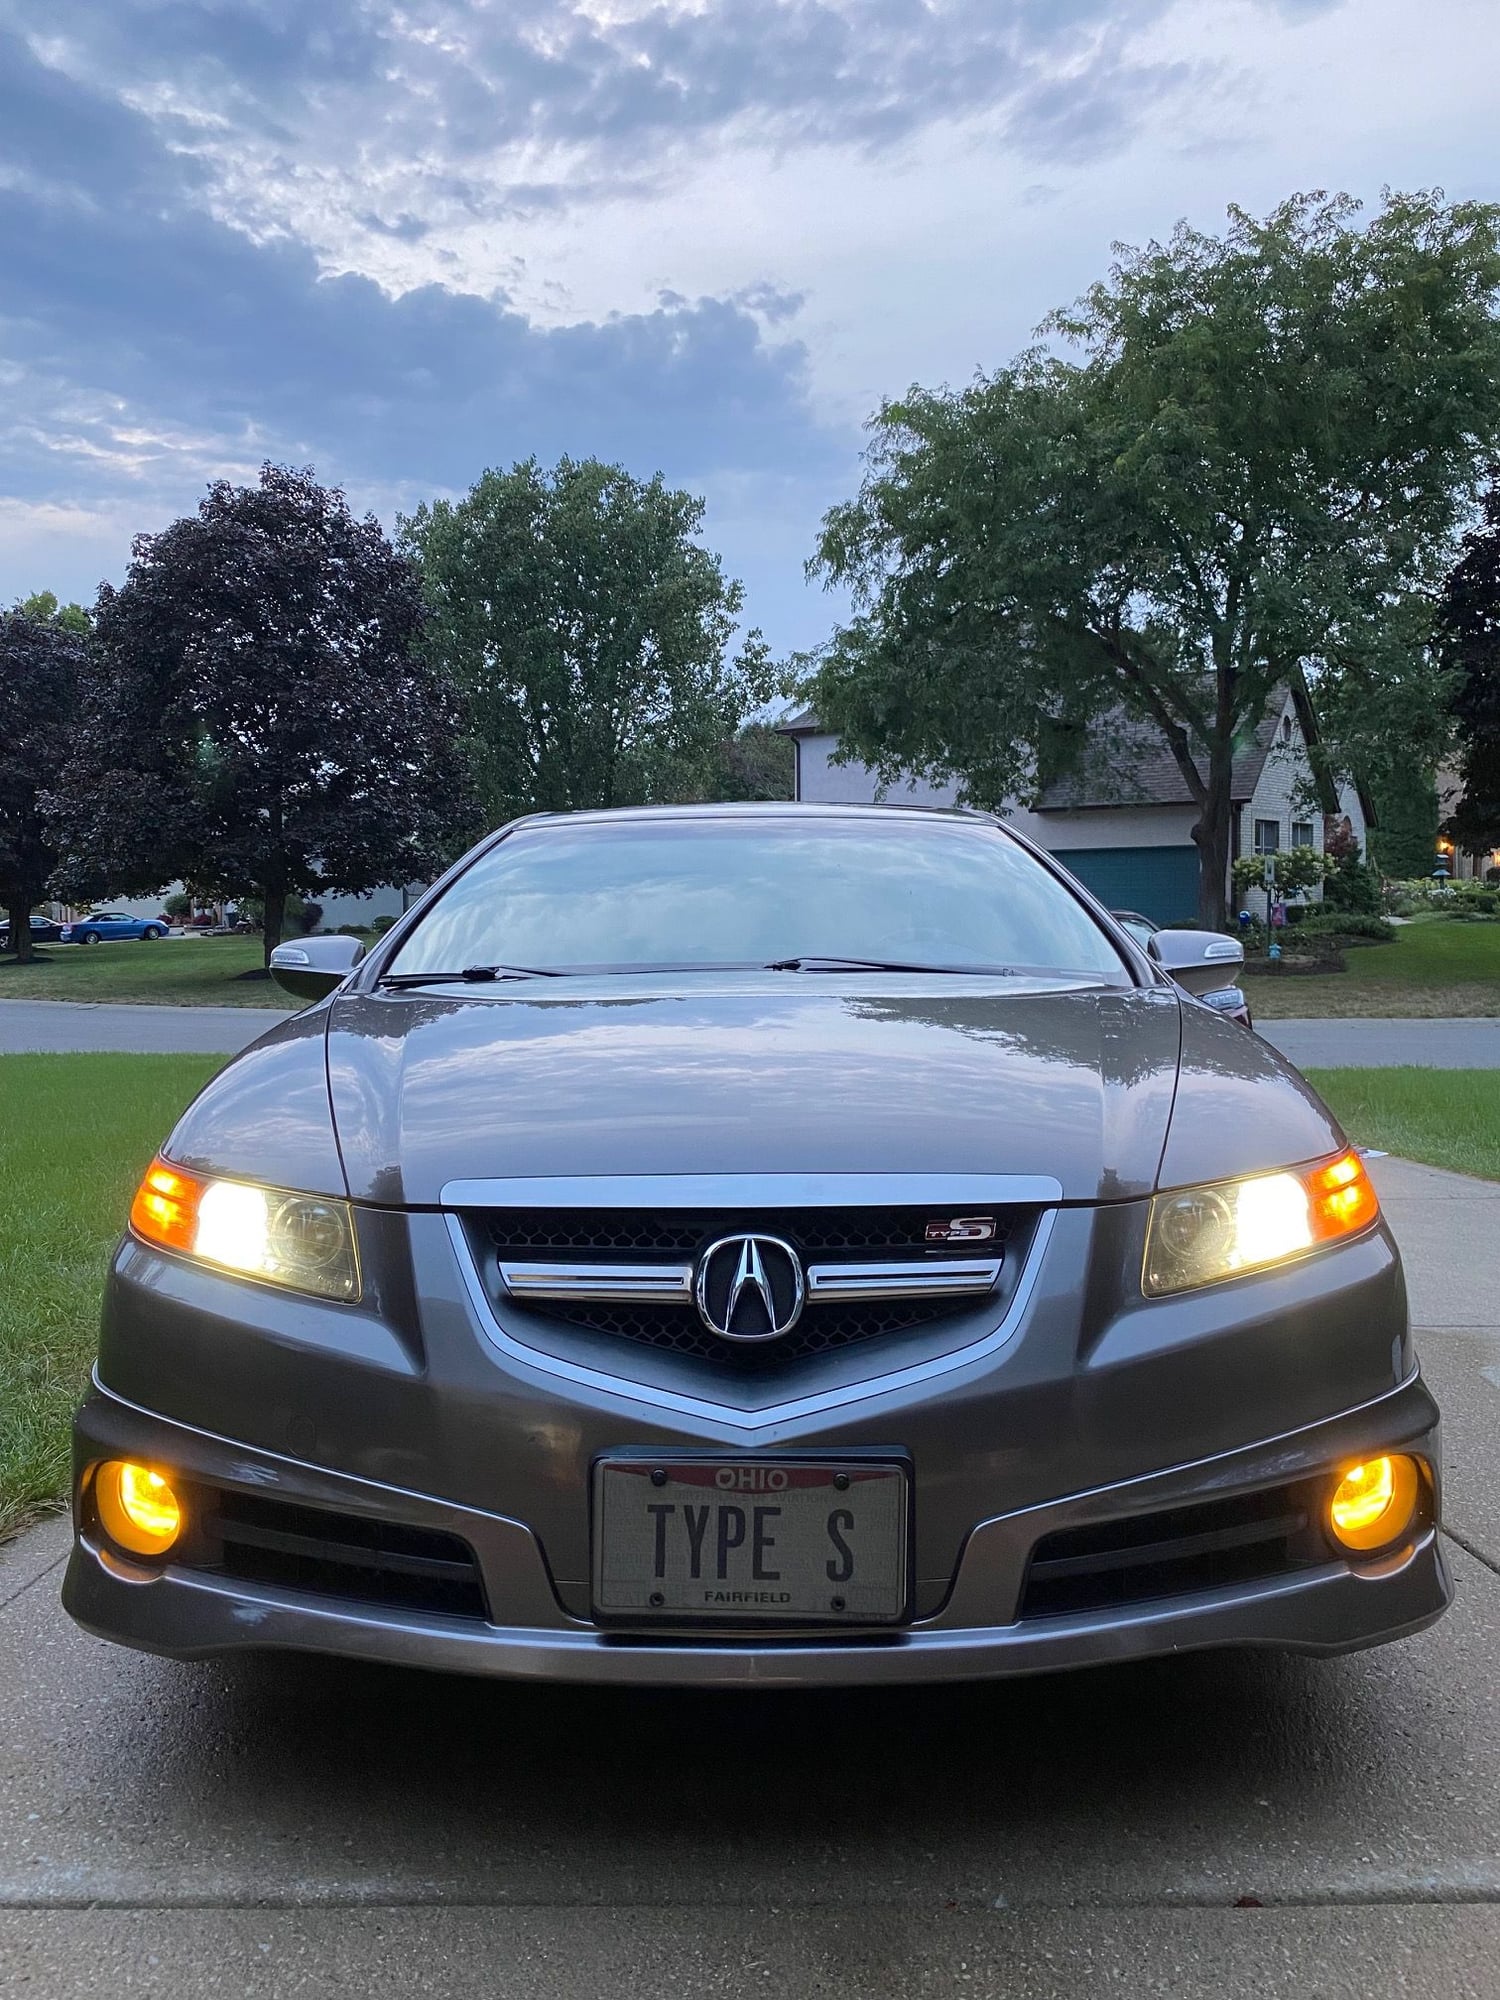 2007 Acura TL - SOLD: 2007 Acura TL Type S Carbon Bronze Pearl - MINT - Clean Title - Used - VIN 19UUA765X7A000278 - 137,280 Miles - 6 cyl - 2WD - Automatic - Sedan - Other - Pickerington, OH 43147, United States